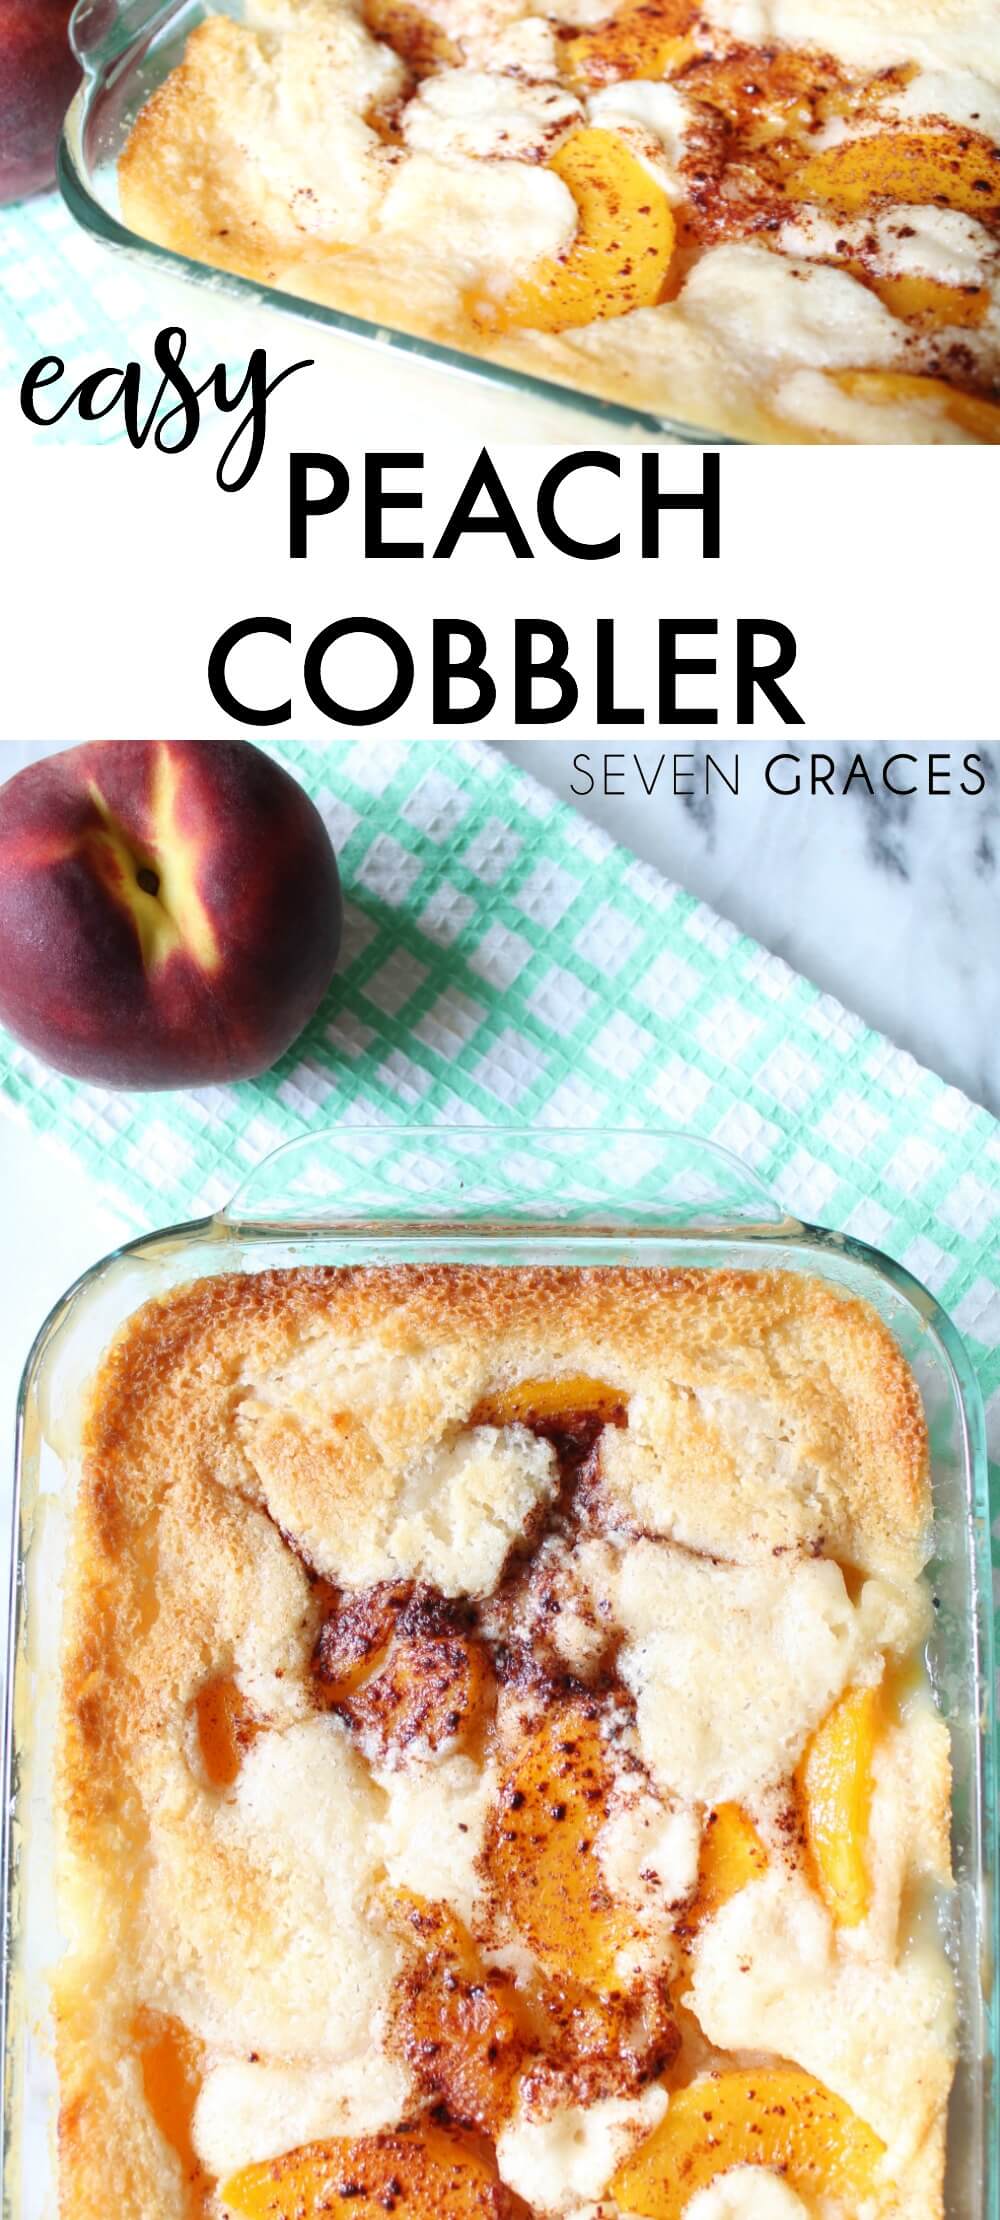 The easiest and most delicious peach cobbler recipe you'll ever need. A nice crunch on the top with a gooey filling on the inside. Delicious!